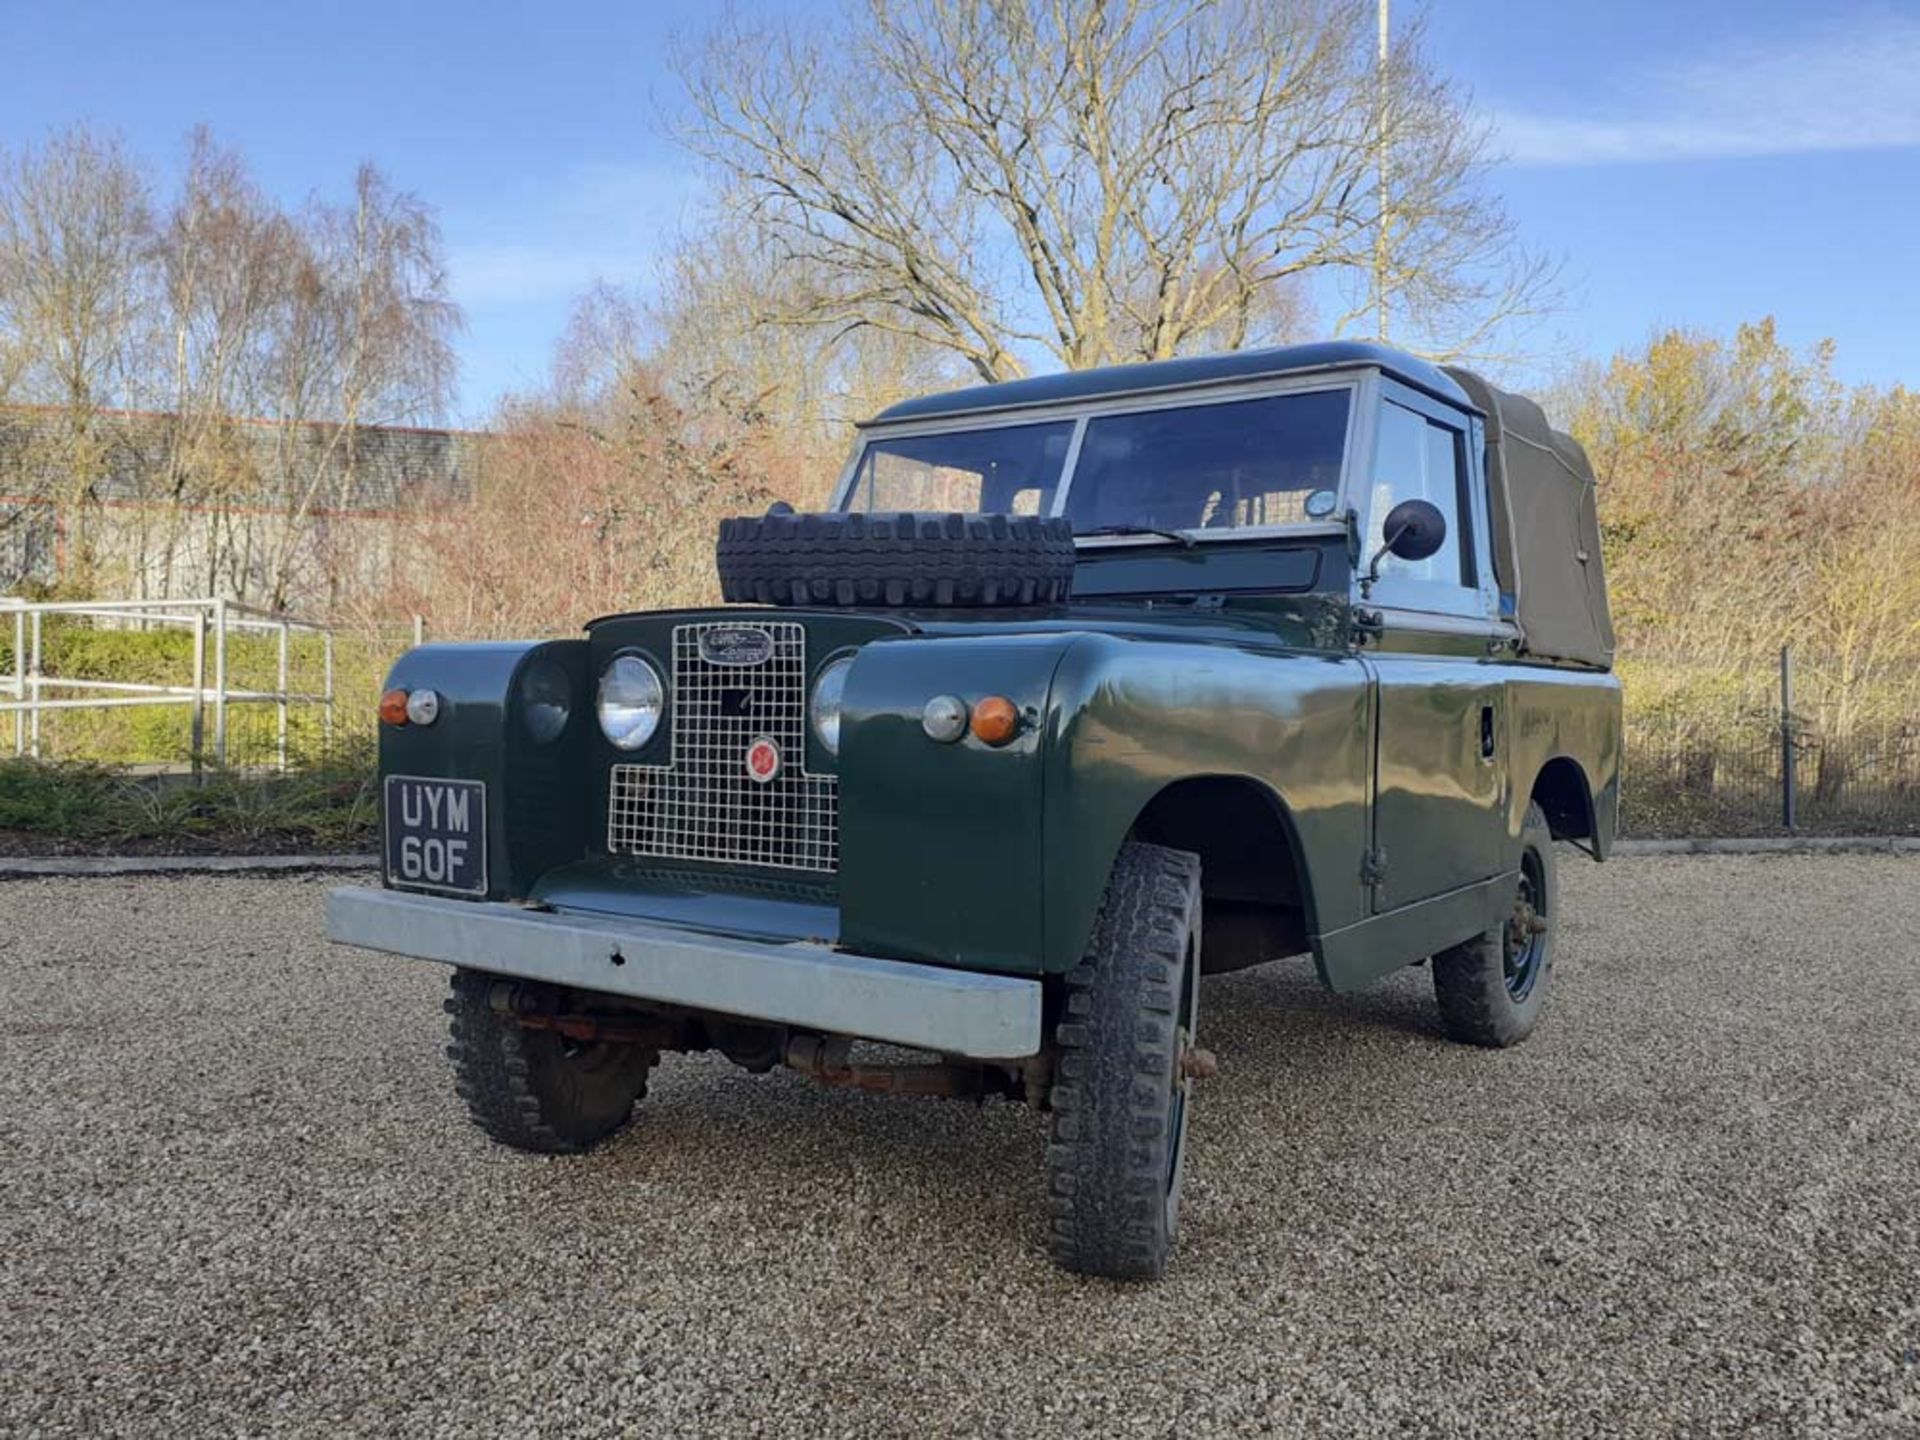 UYM 60F (1968) Land Rover Series 2A 88 inch (SWB) first registered 15/05/1968, chassis no.